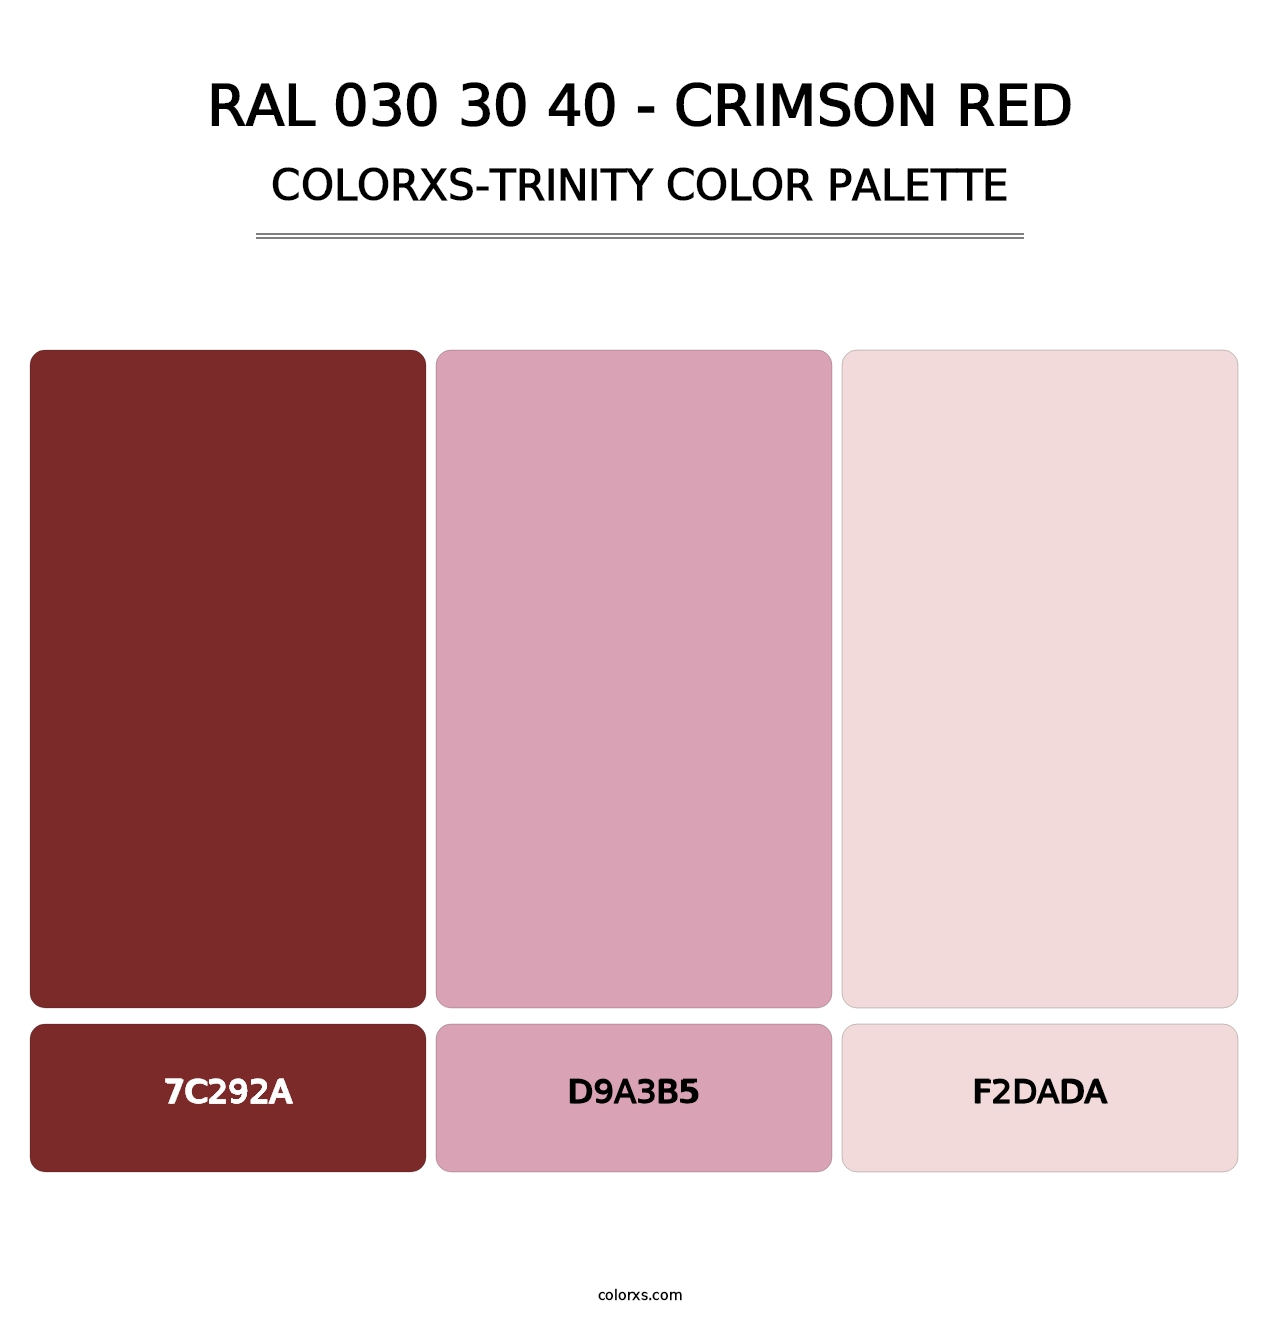 RAL 030 30 40 - Crimson Red - Colorxs Trinity Palette